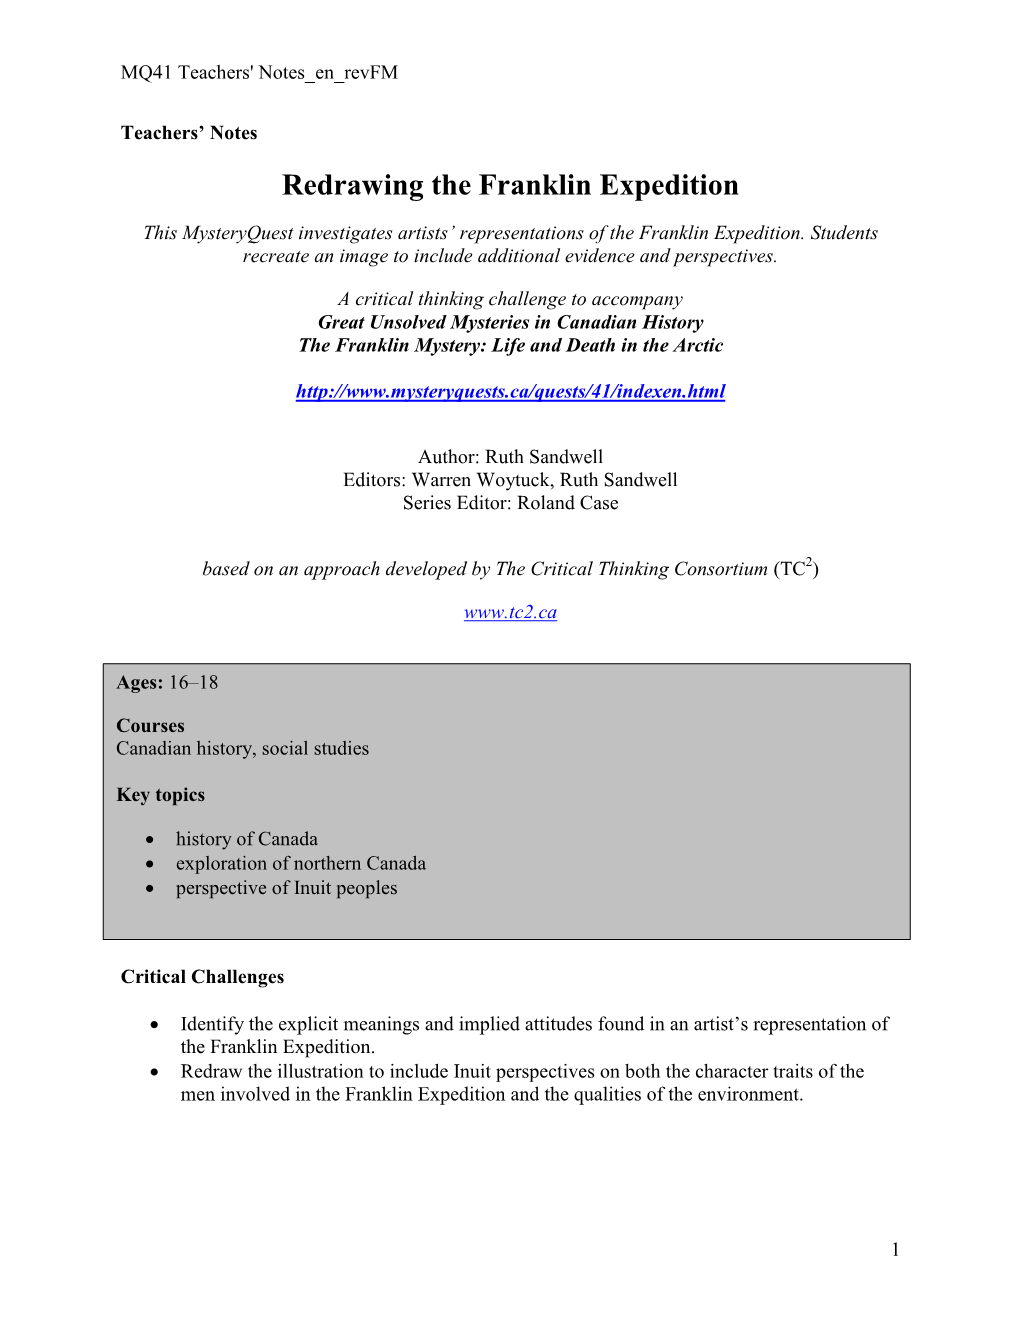 Redrawing the Franklin Expedition